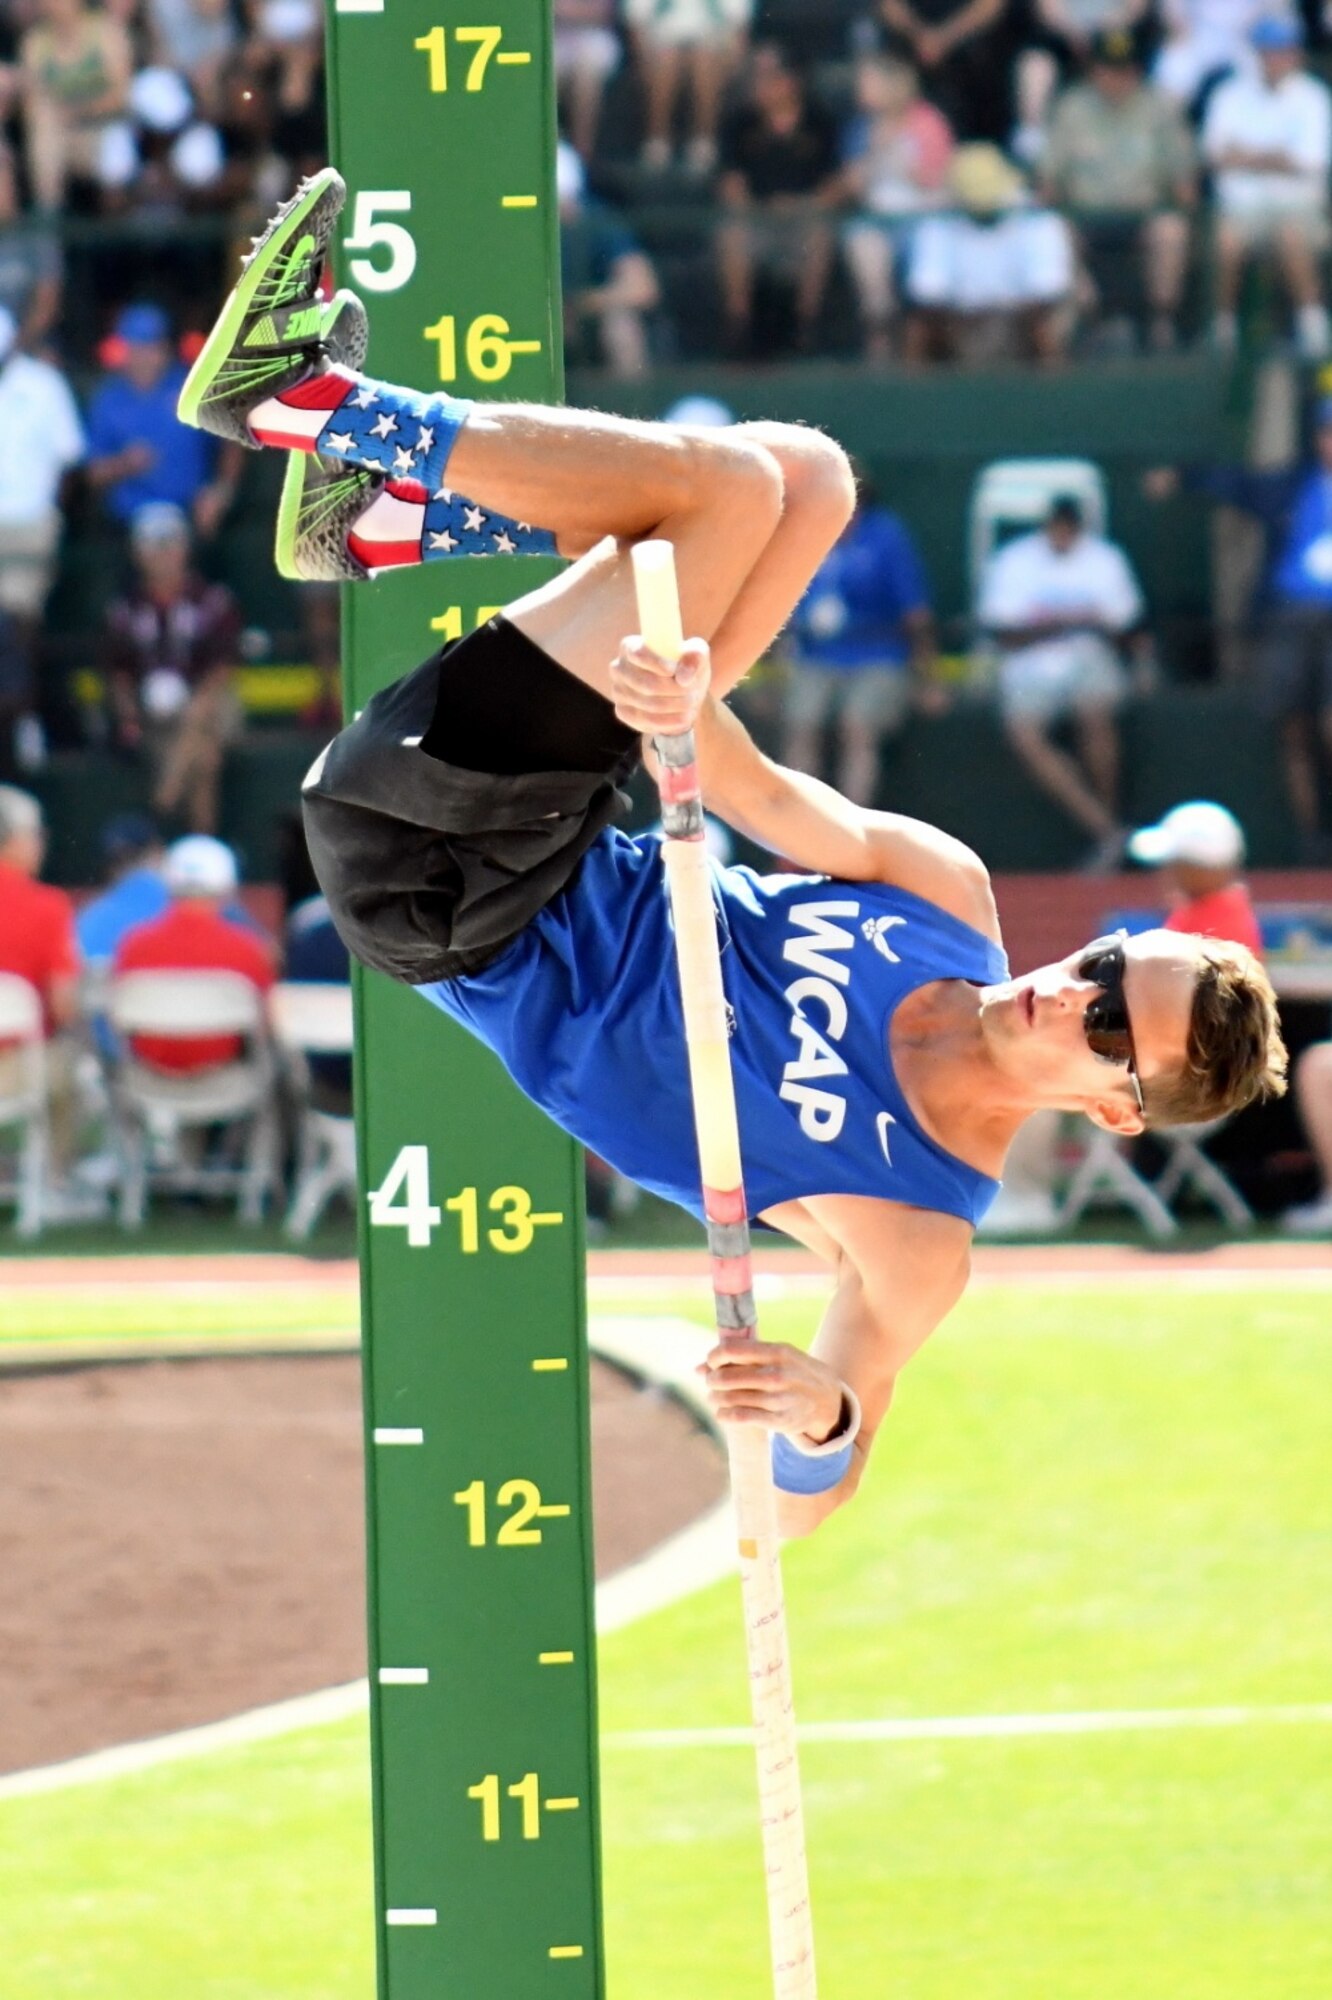 U.S. Air Force 1st Lt. Cale Simmons competes in the men's pole vault finals July 4. The U.S. Olympic Team Track and Field Trials were held July 1-10 in Eugene, Oregon. Simmons finished second with a jump of 5.65 meters, or 18-feet, 6 1/2 inches, to claim his spot on the U.S. Olympic pole vault team. (Photo courtesy Tom "Drac" Williams)